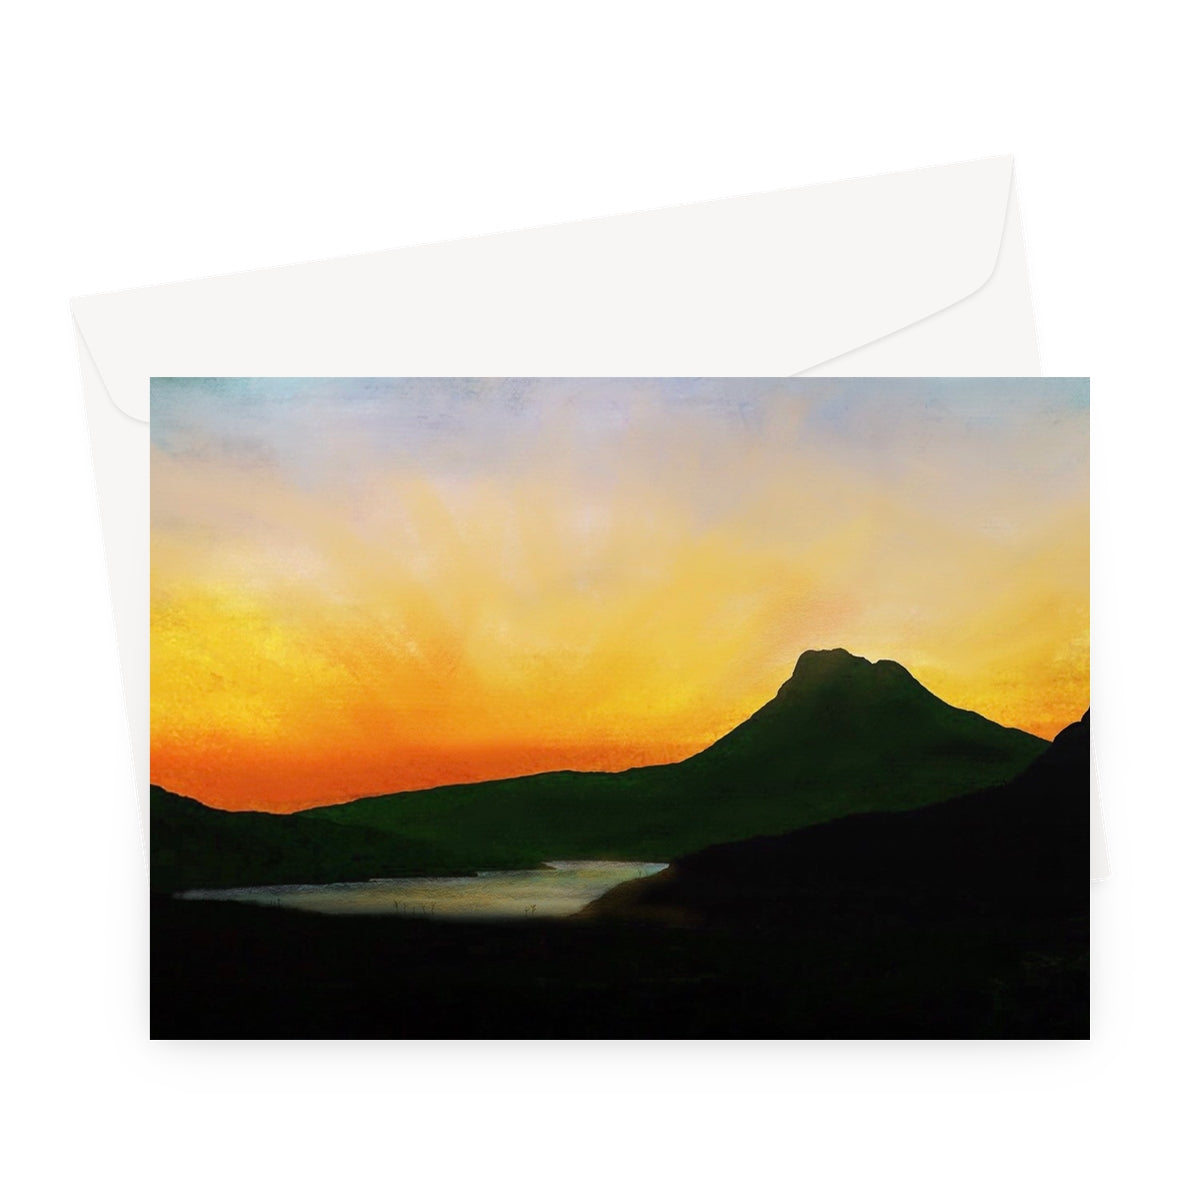 Stac Pollaidh Dusk Art Gifts Greeting Card-Stationery-Scottish Lochs & Mountains Art Gallery-A5 Landscape-1 Card-Paintings, Prints, Homeware, Art Gifts From Scotland By Scottish Artist Kevin Hunter